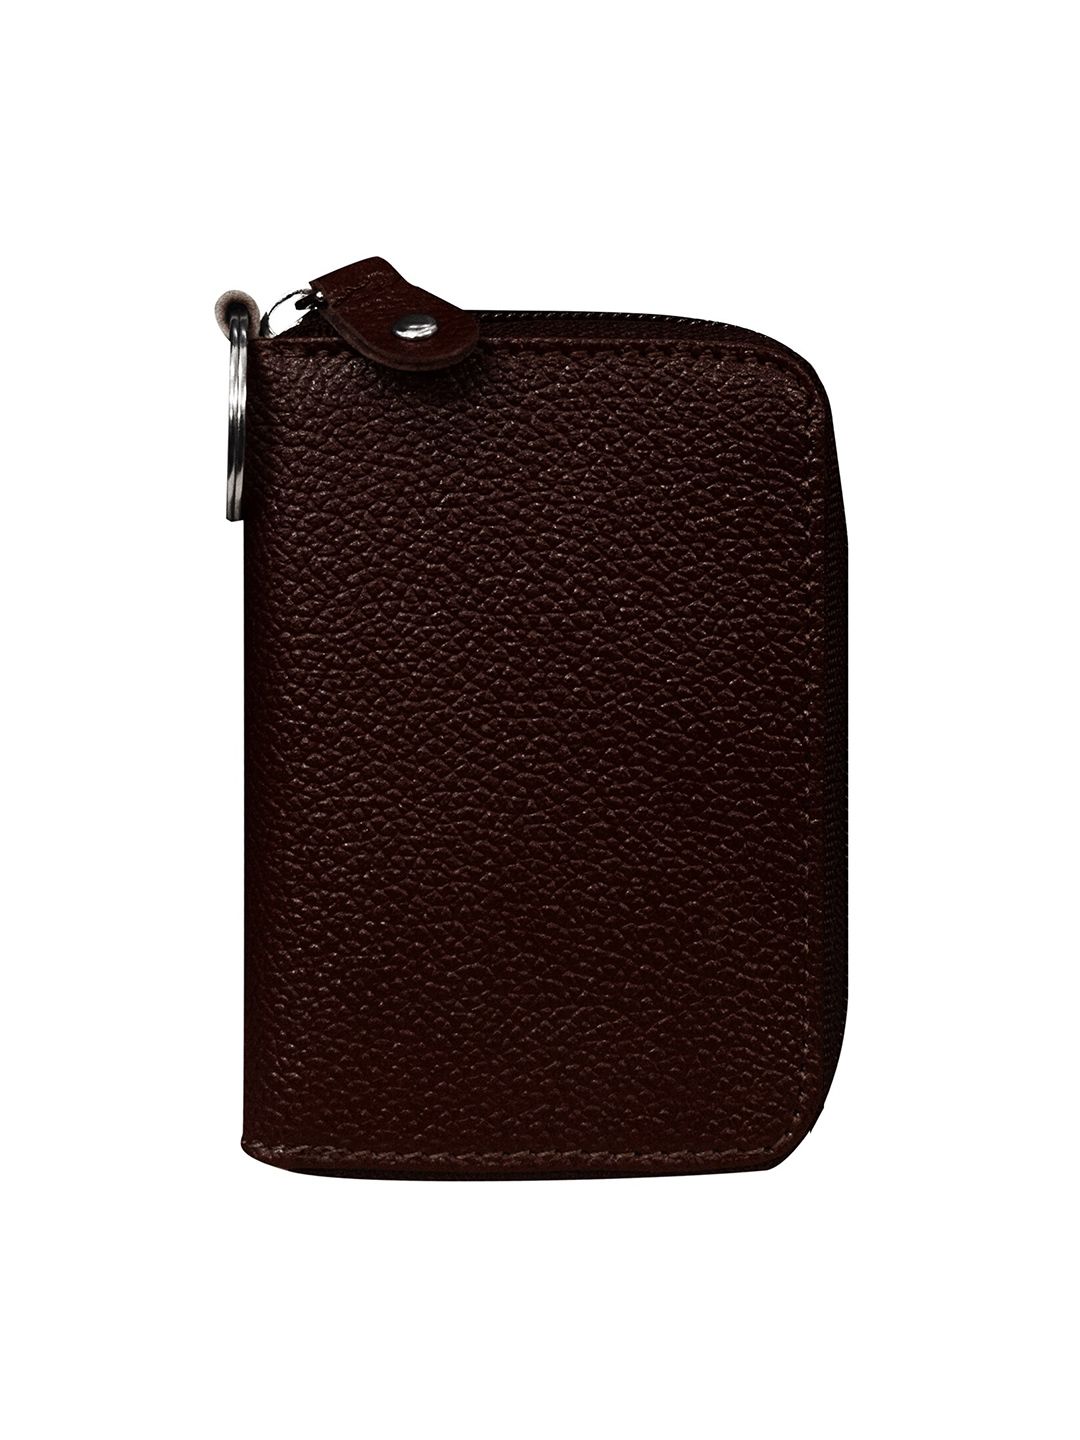 ABYS Unisex Coffee Brown Textured Leather Card Holder Wallet Price in India